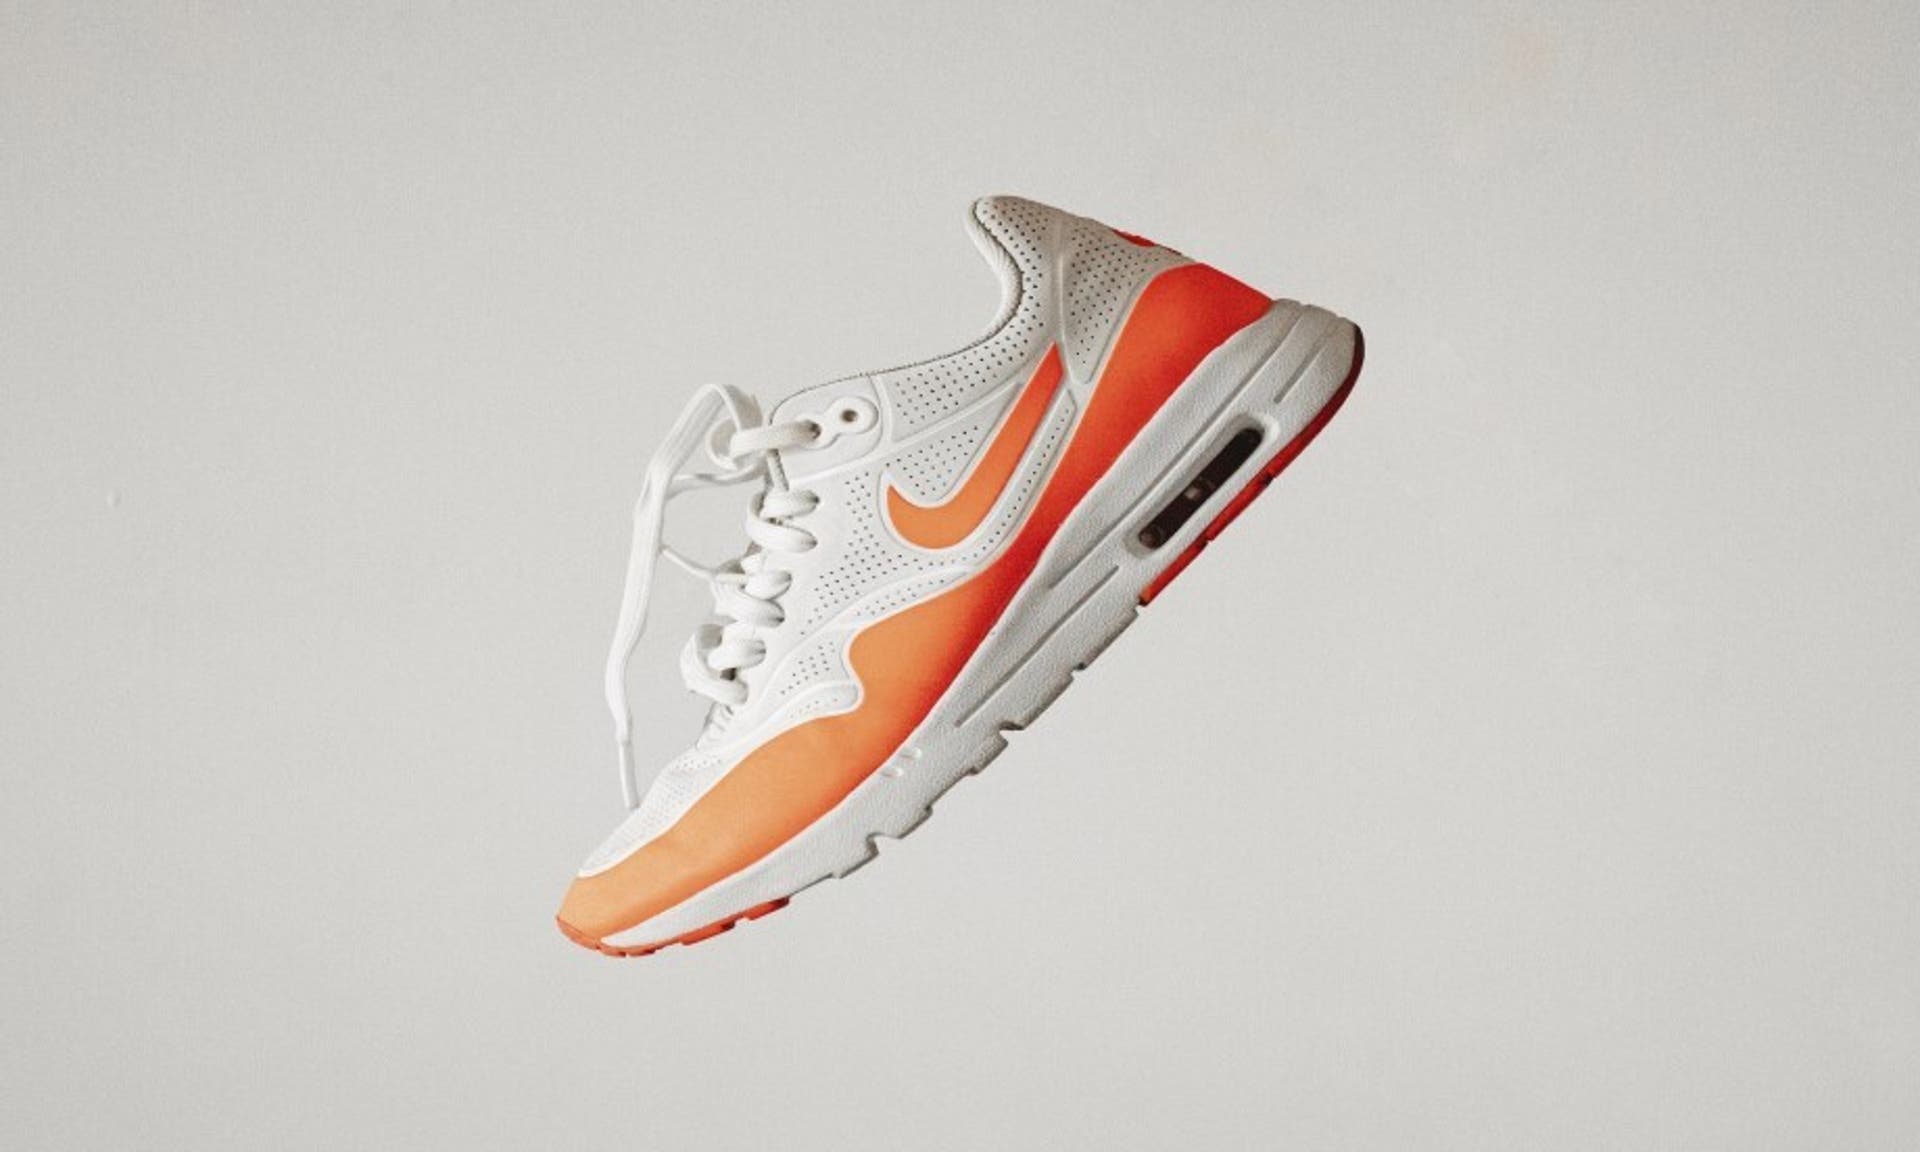  Nike trainers in white and orange 